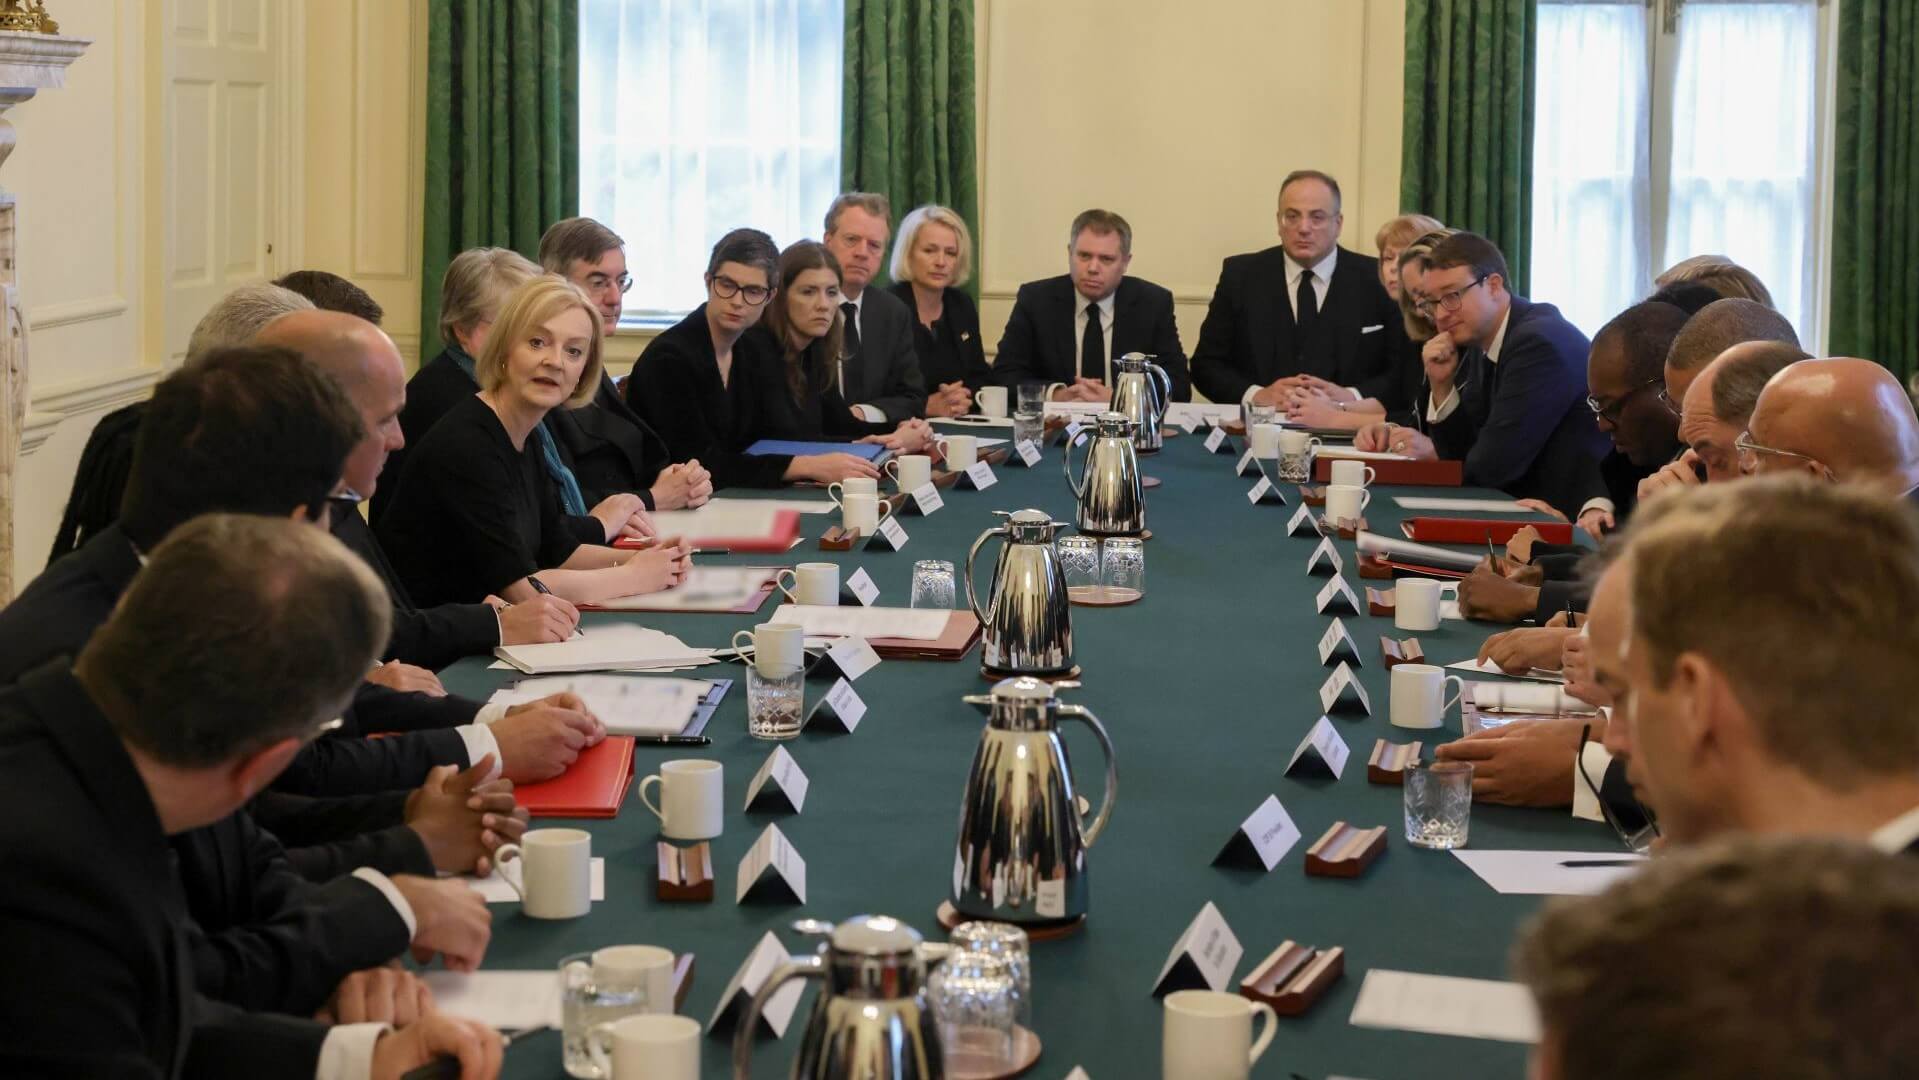 UK PM Liz Truss and MPs in discussion around table